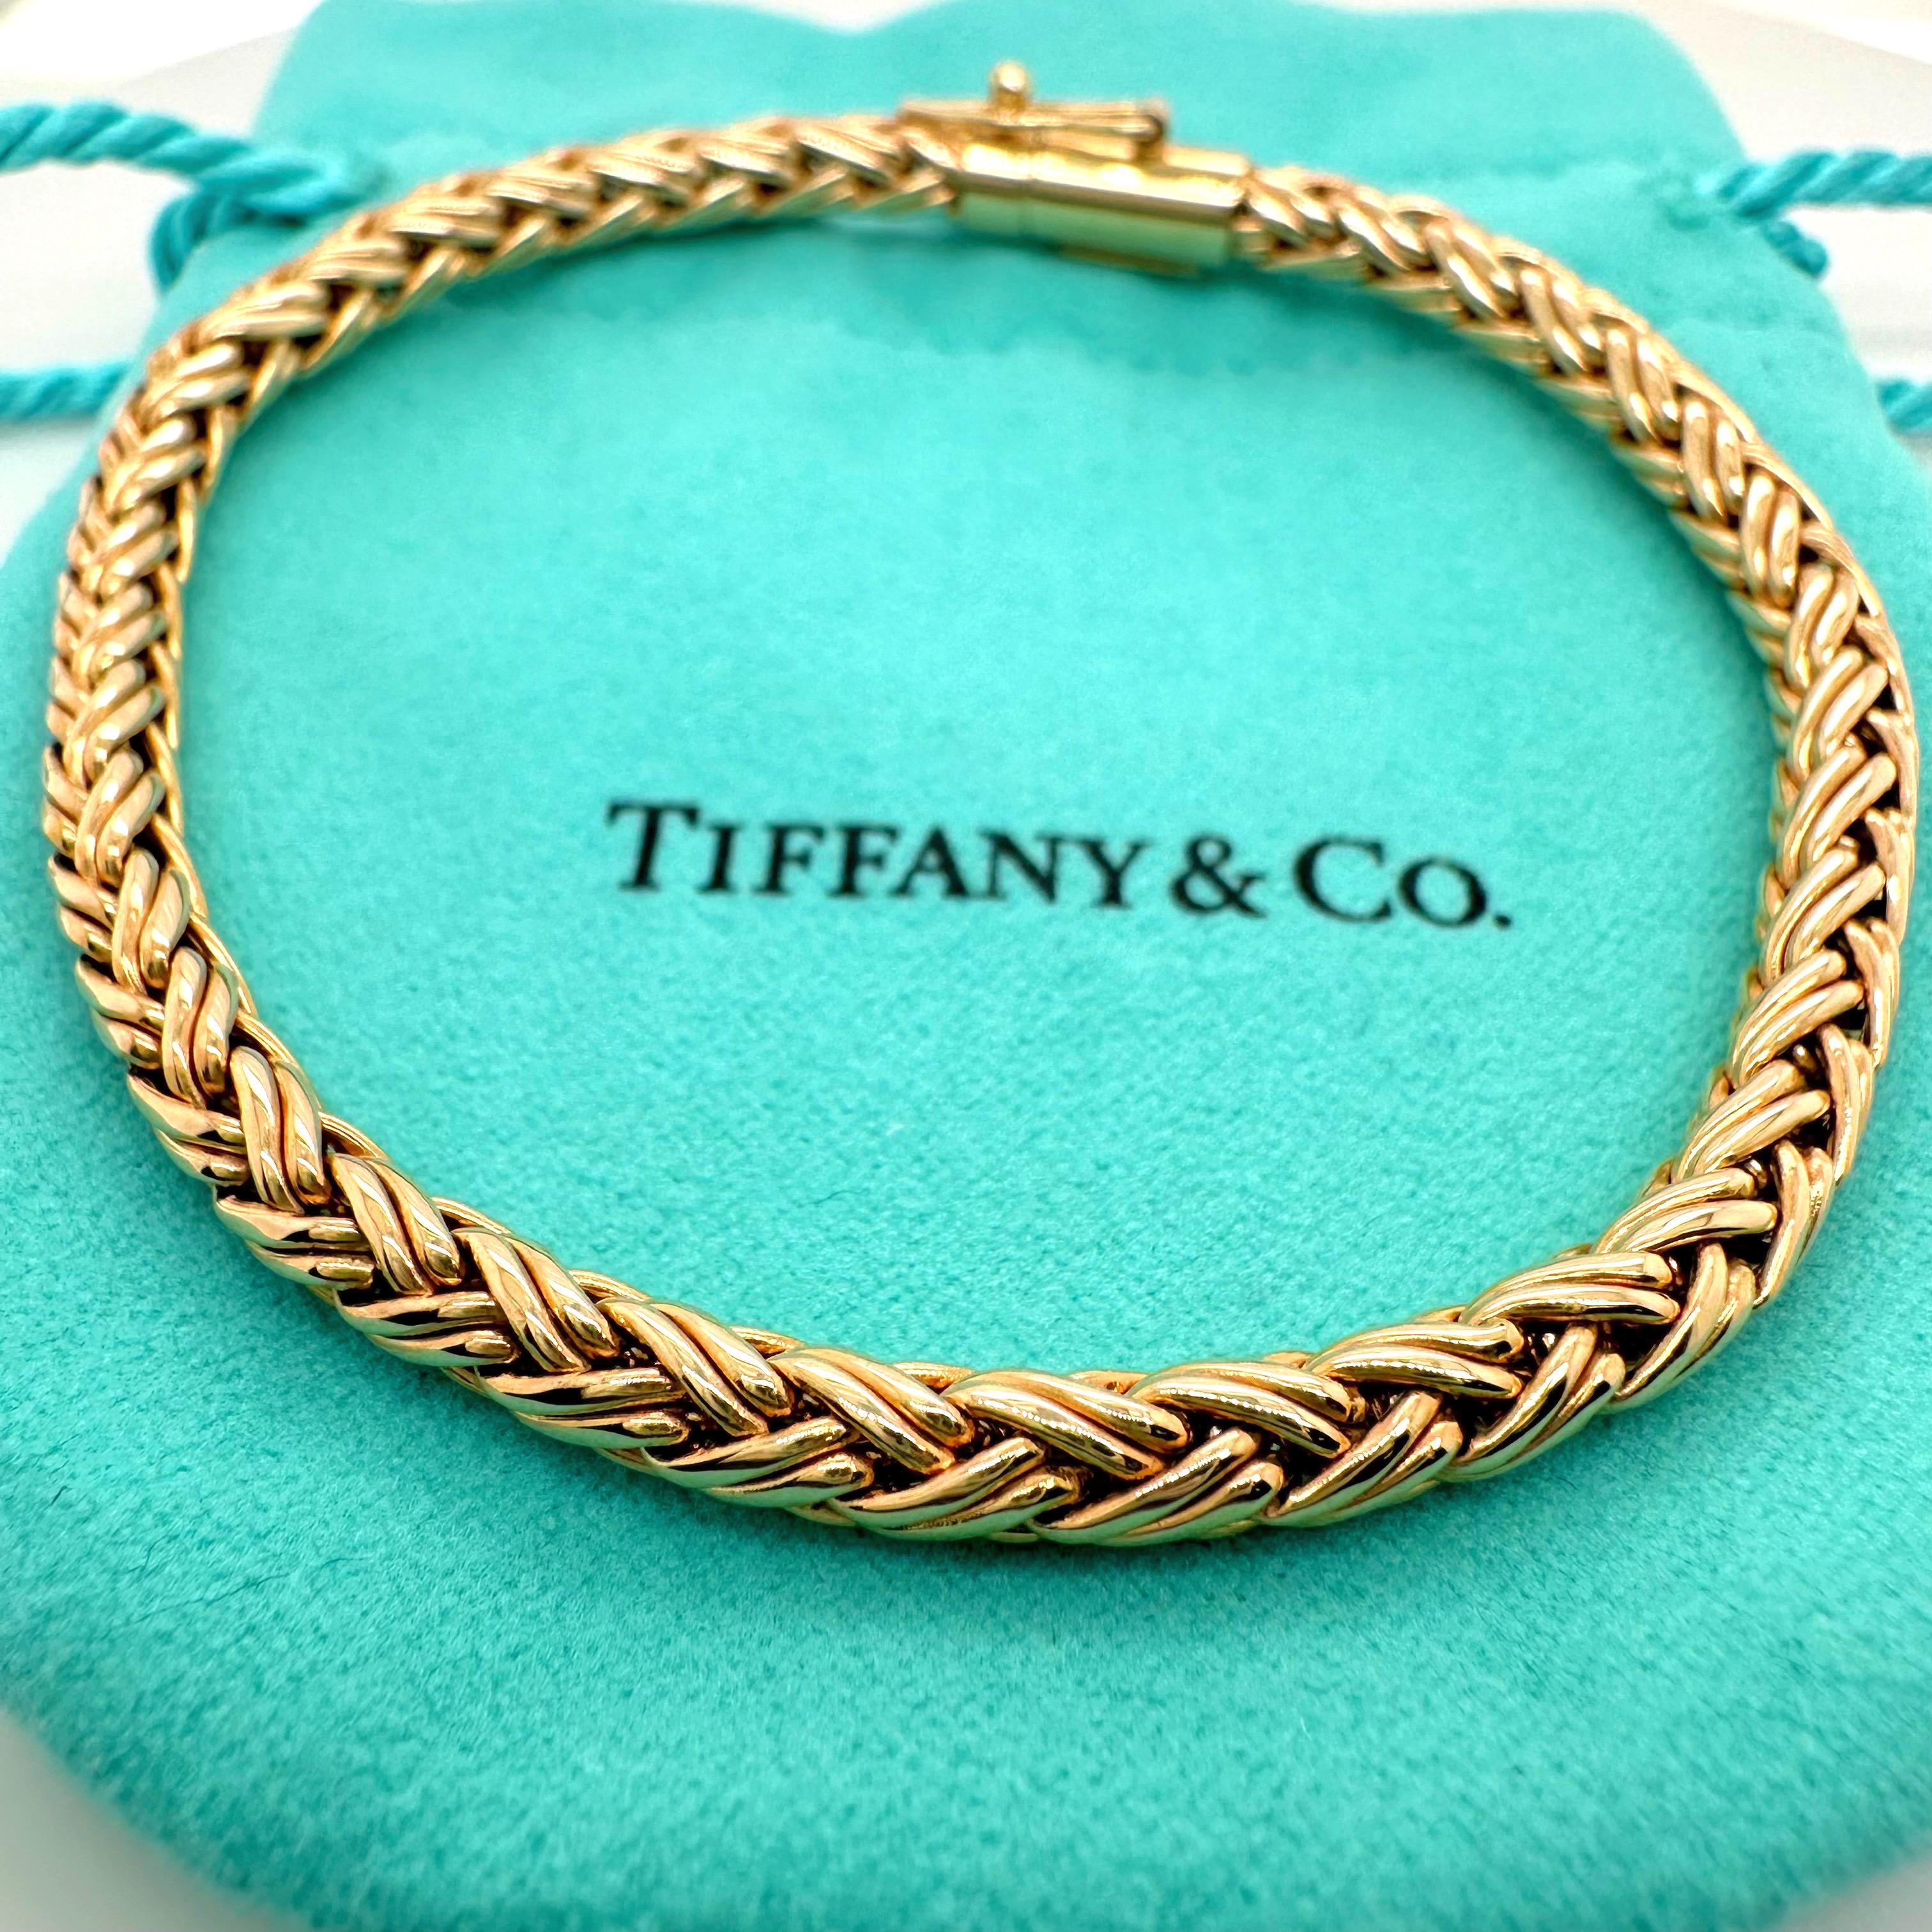 TIFFANY & CO. Braided Wheat Rope Bracelet
Style:  Rope
Metal:  14kt Yellow Gold
Size:  7.5 Inches
Hallmark:   TIFFANY&CO. 585
Includes:   T&C Jewelry Pouch

Sku##11383TCF060623